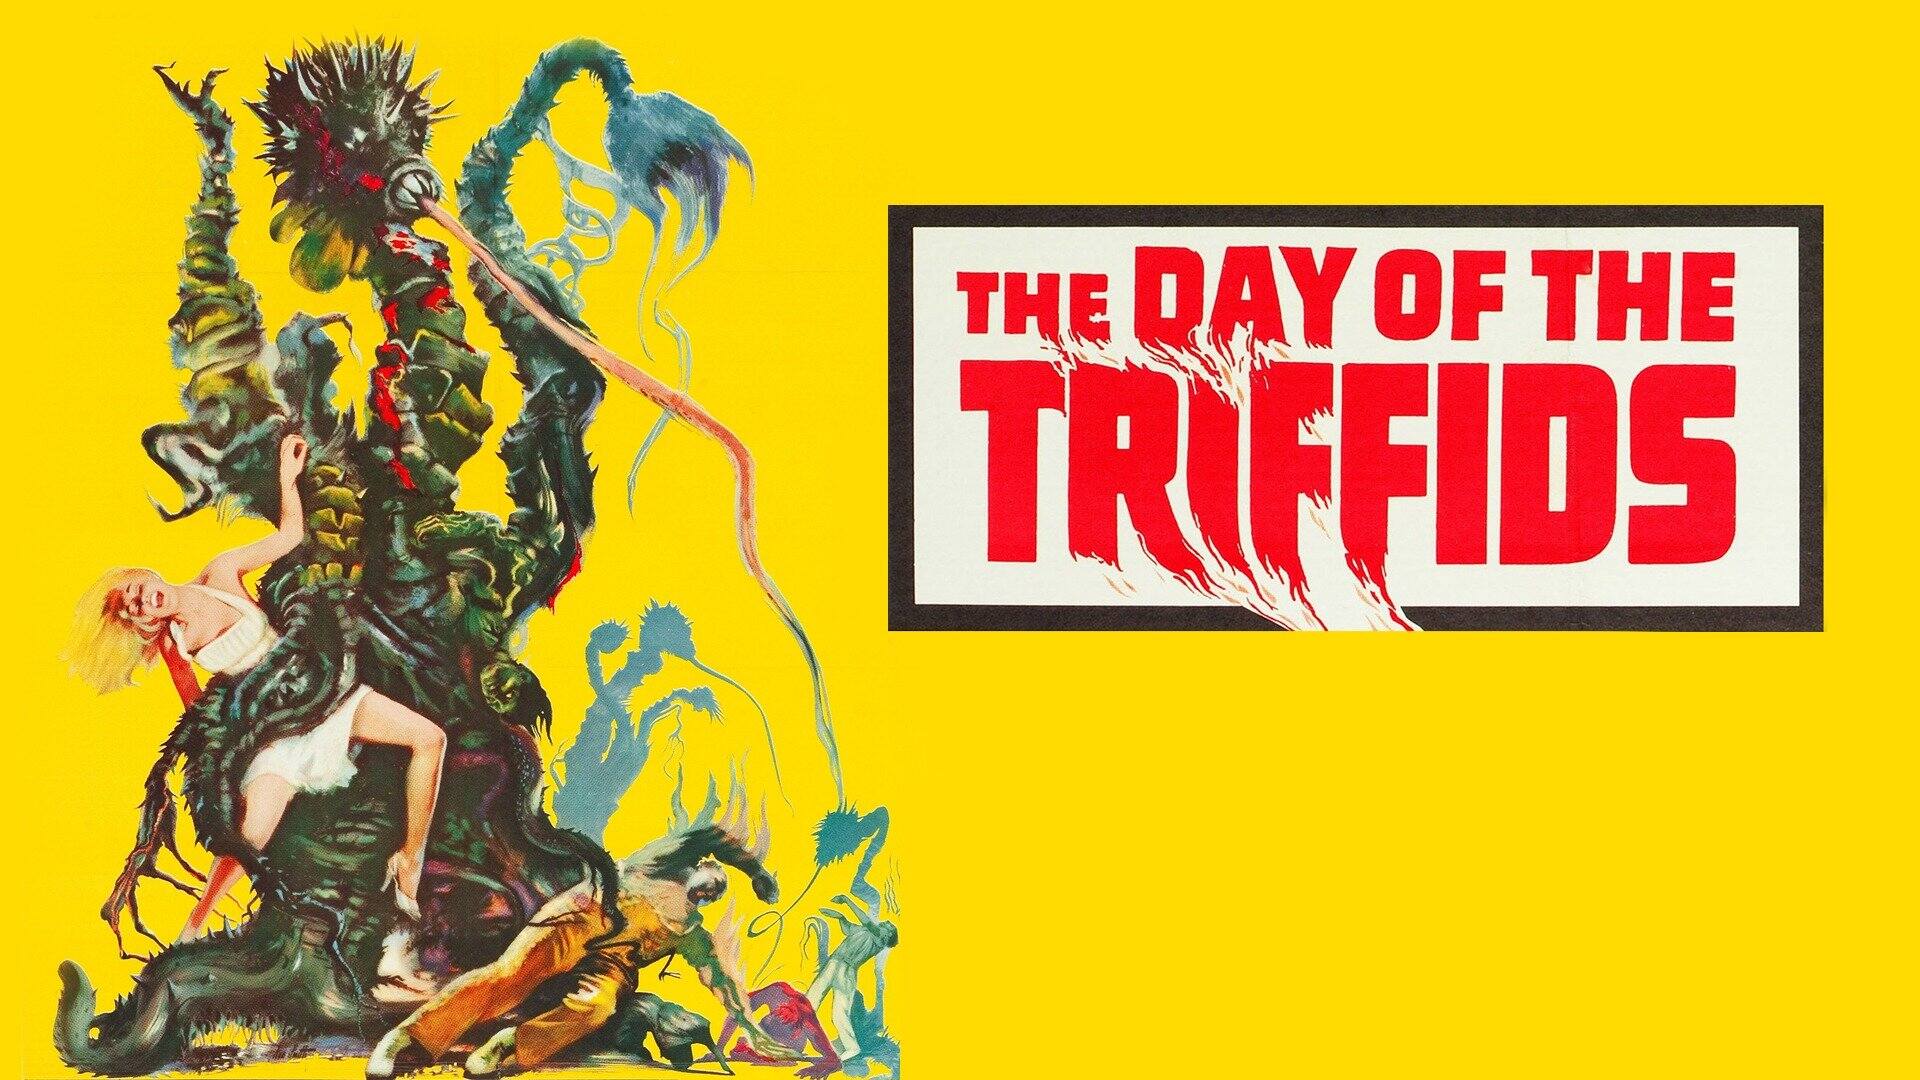 33-facts-about-the-movie-the-day-of-the-triffids